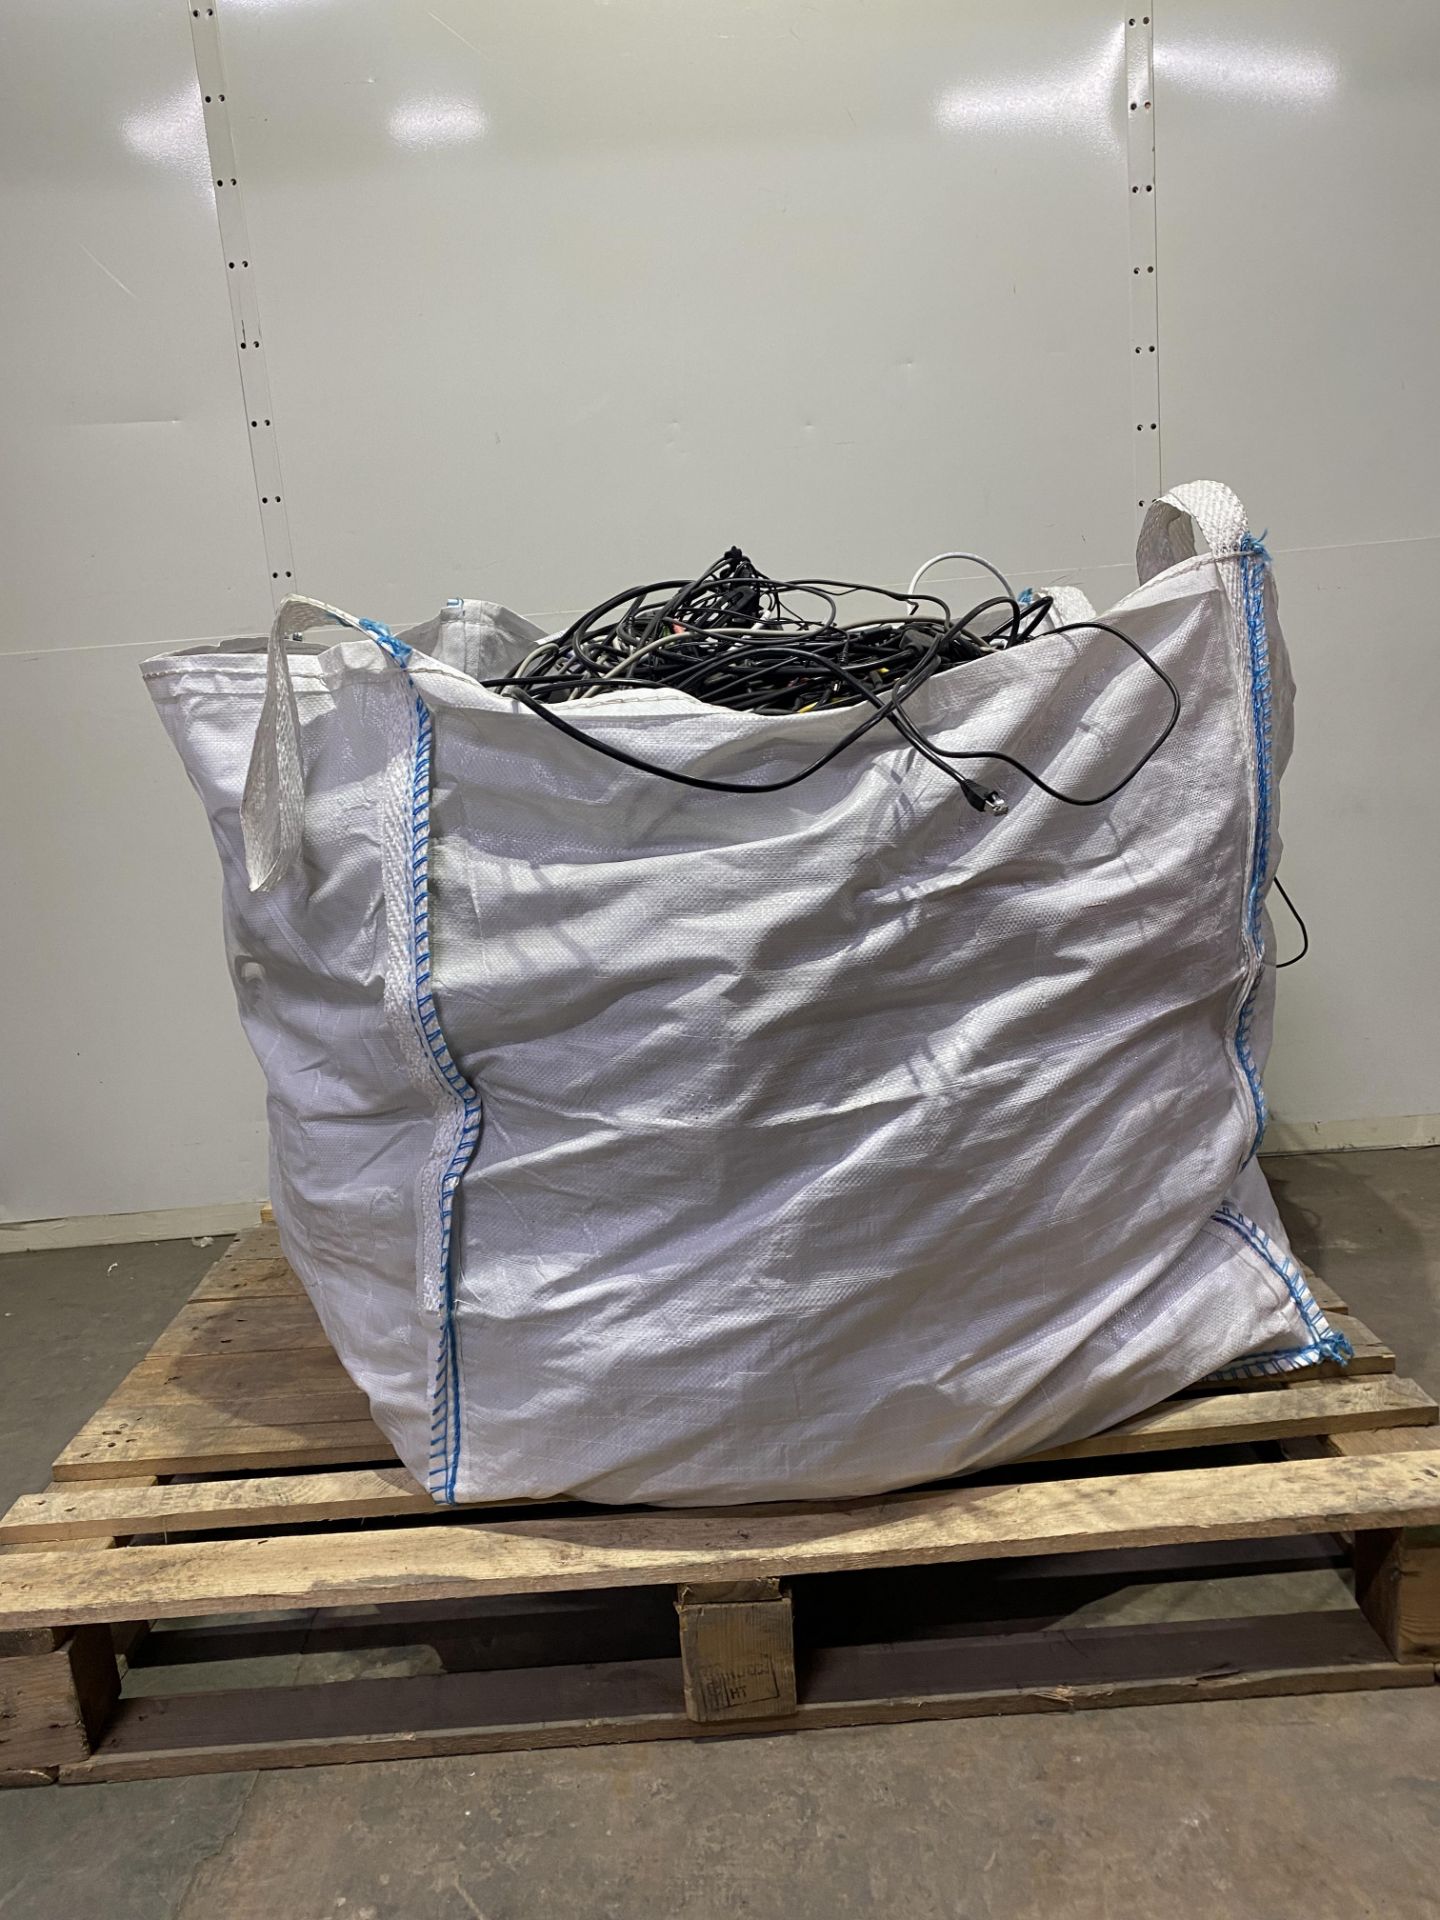 Large Quantity Of Various Electronic Wires, 140kg Bag - Image 5 of 12